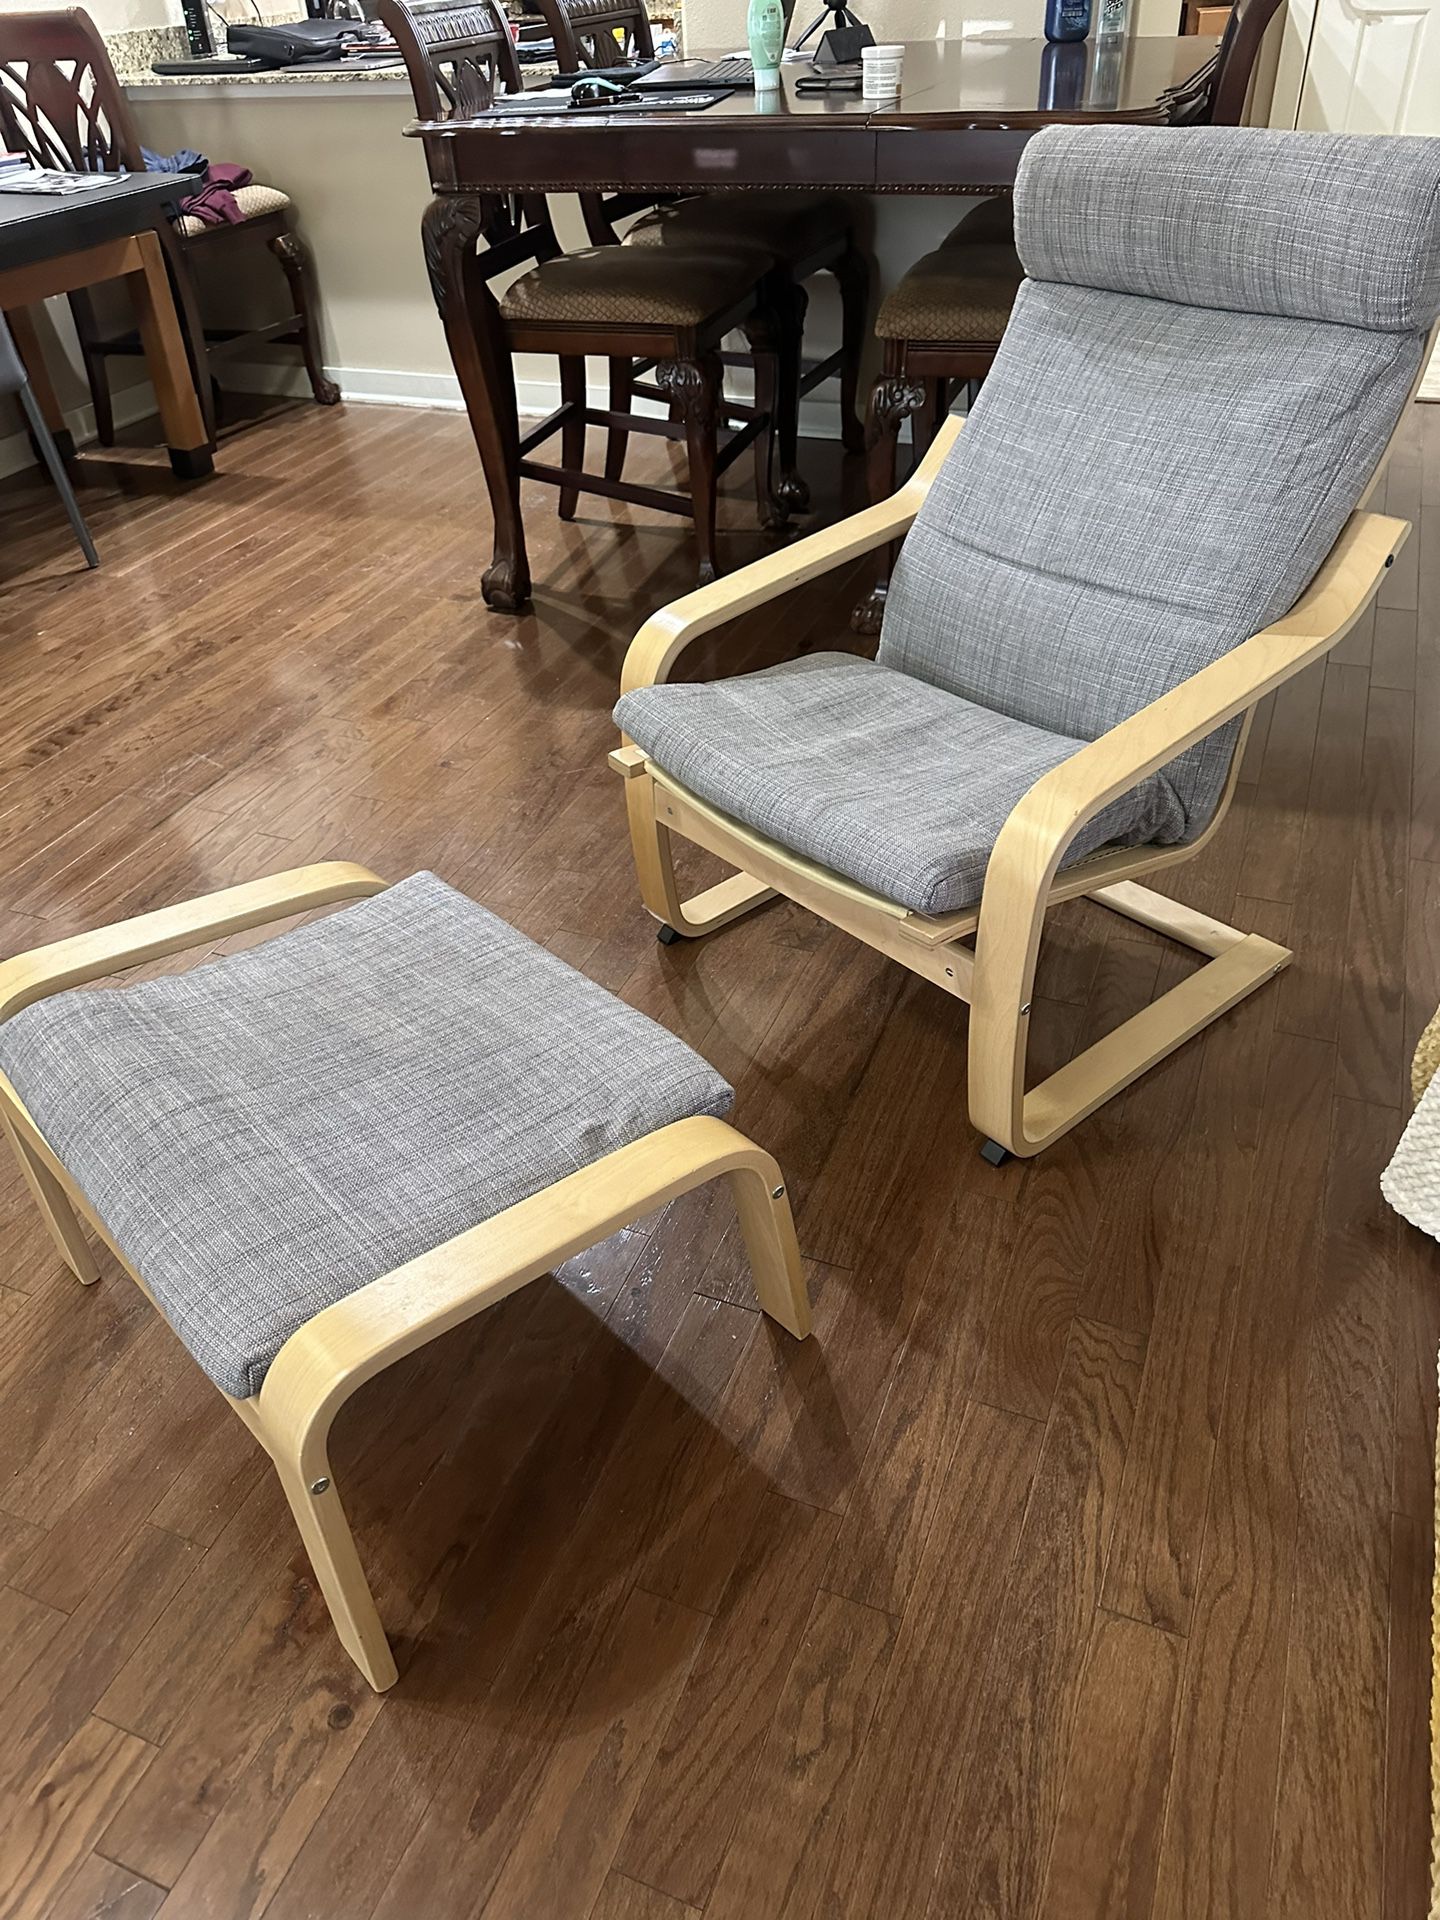 Wooden Recliner And Ottoman